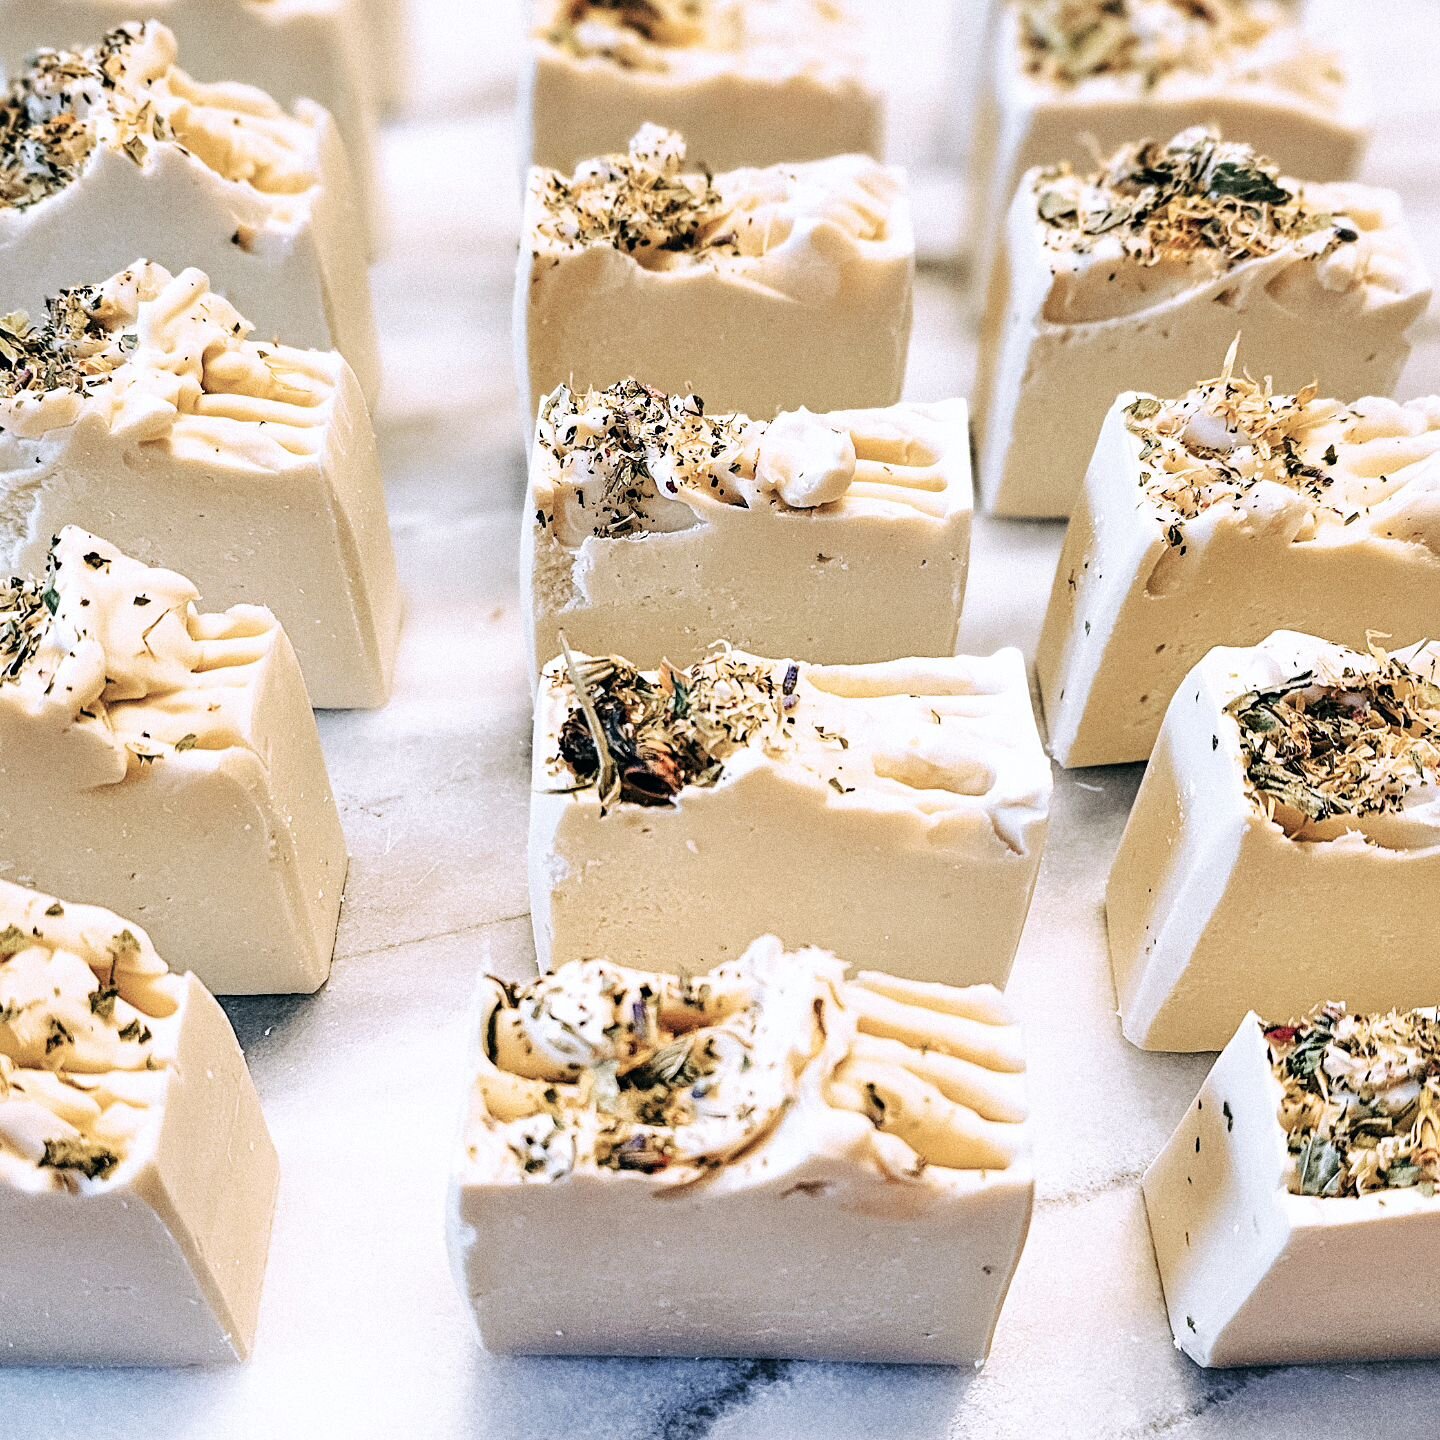 Beautiful lifestyle touches in a home celebrate the daily moments + shows care to guests. Coming soon these Powder Room Pretty soaps - just in time for spring + Mother's Day gifting. Scented, Green Clover + Aloe drosted with dried botanicals. Message